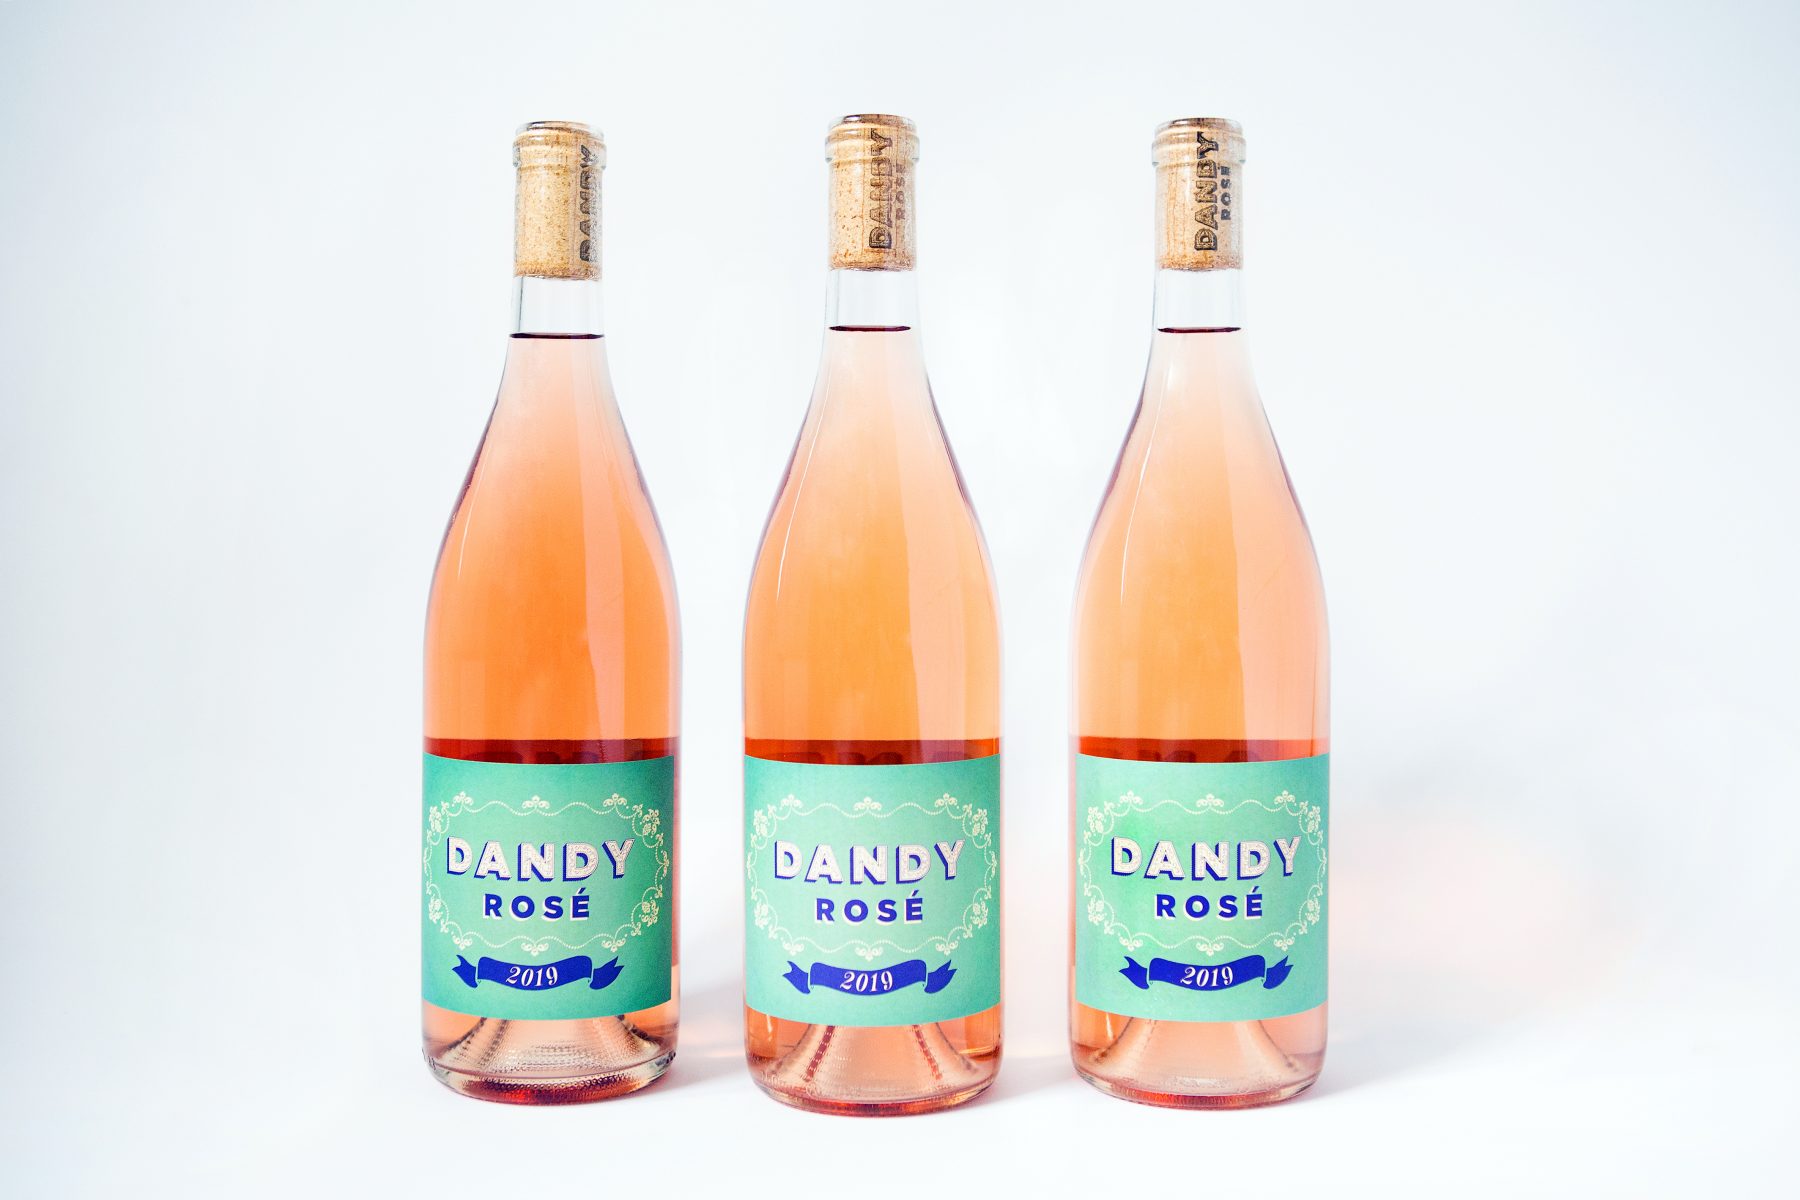 Dandy Rosé is a light pink wine crafted from grapes from the Texas High Plains. Photo courtesy Wine for the People.